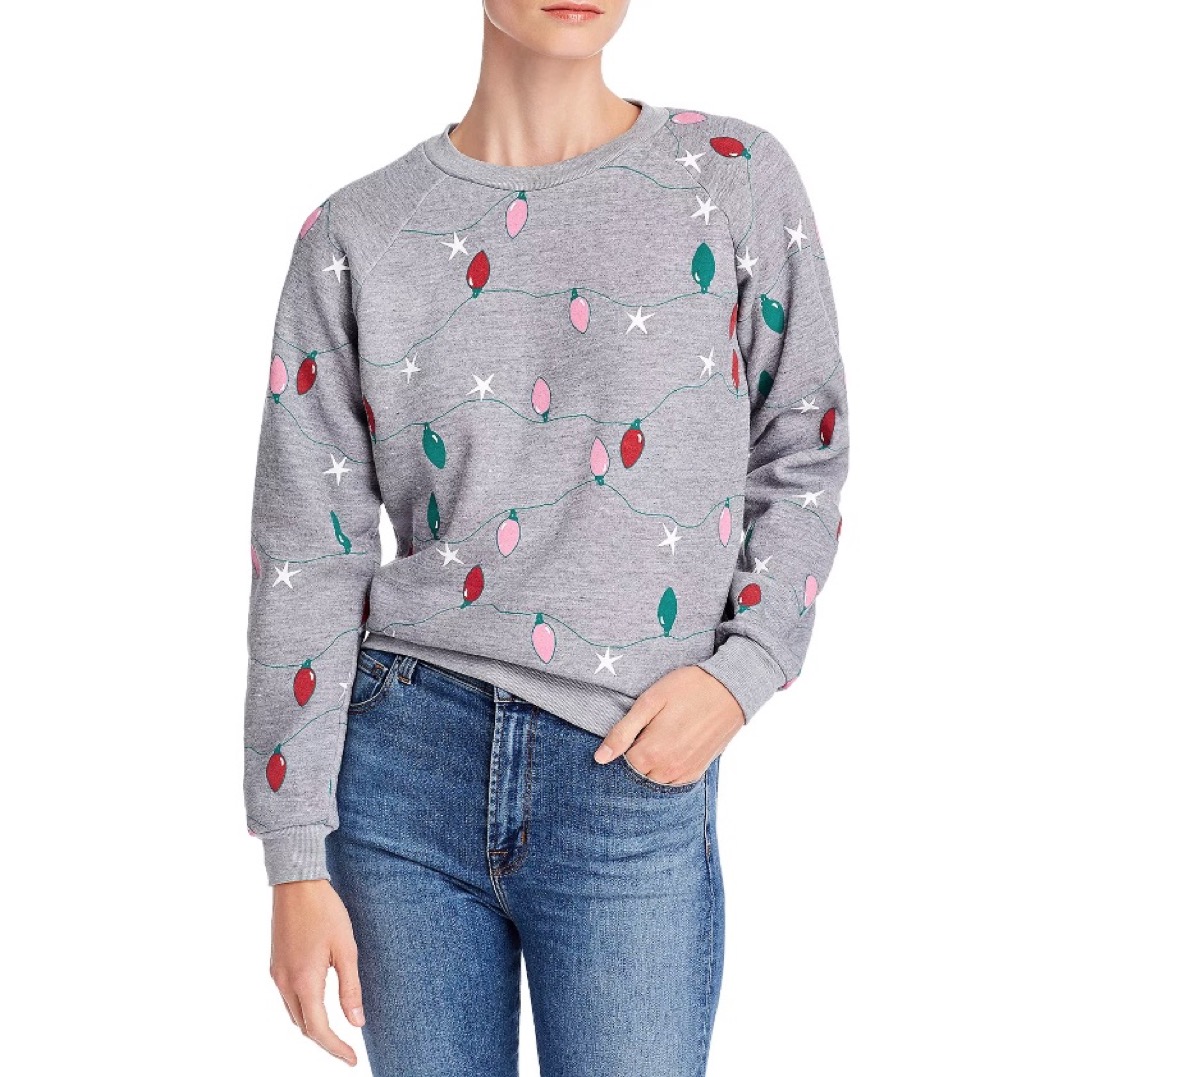 woman wearing gray sweater with christmas lights on it